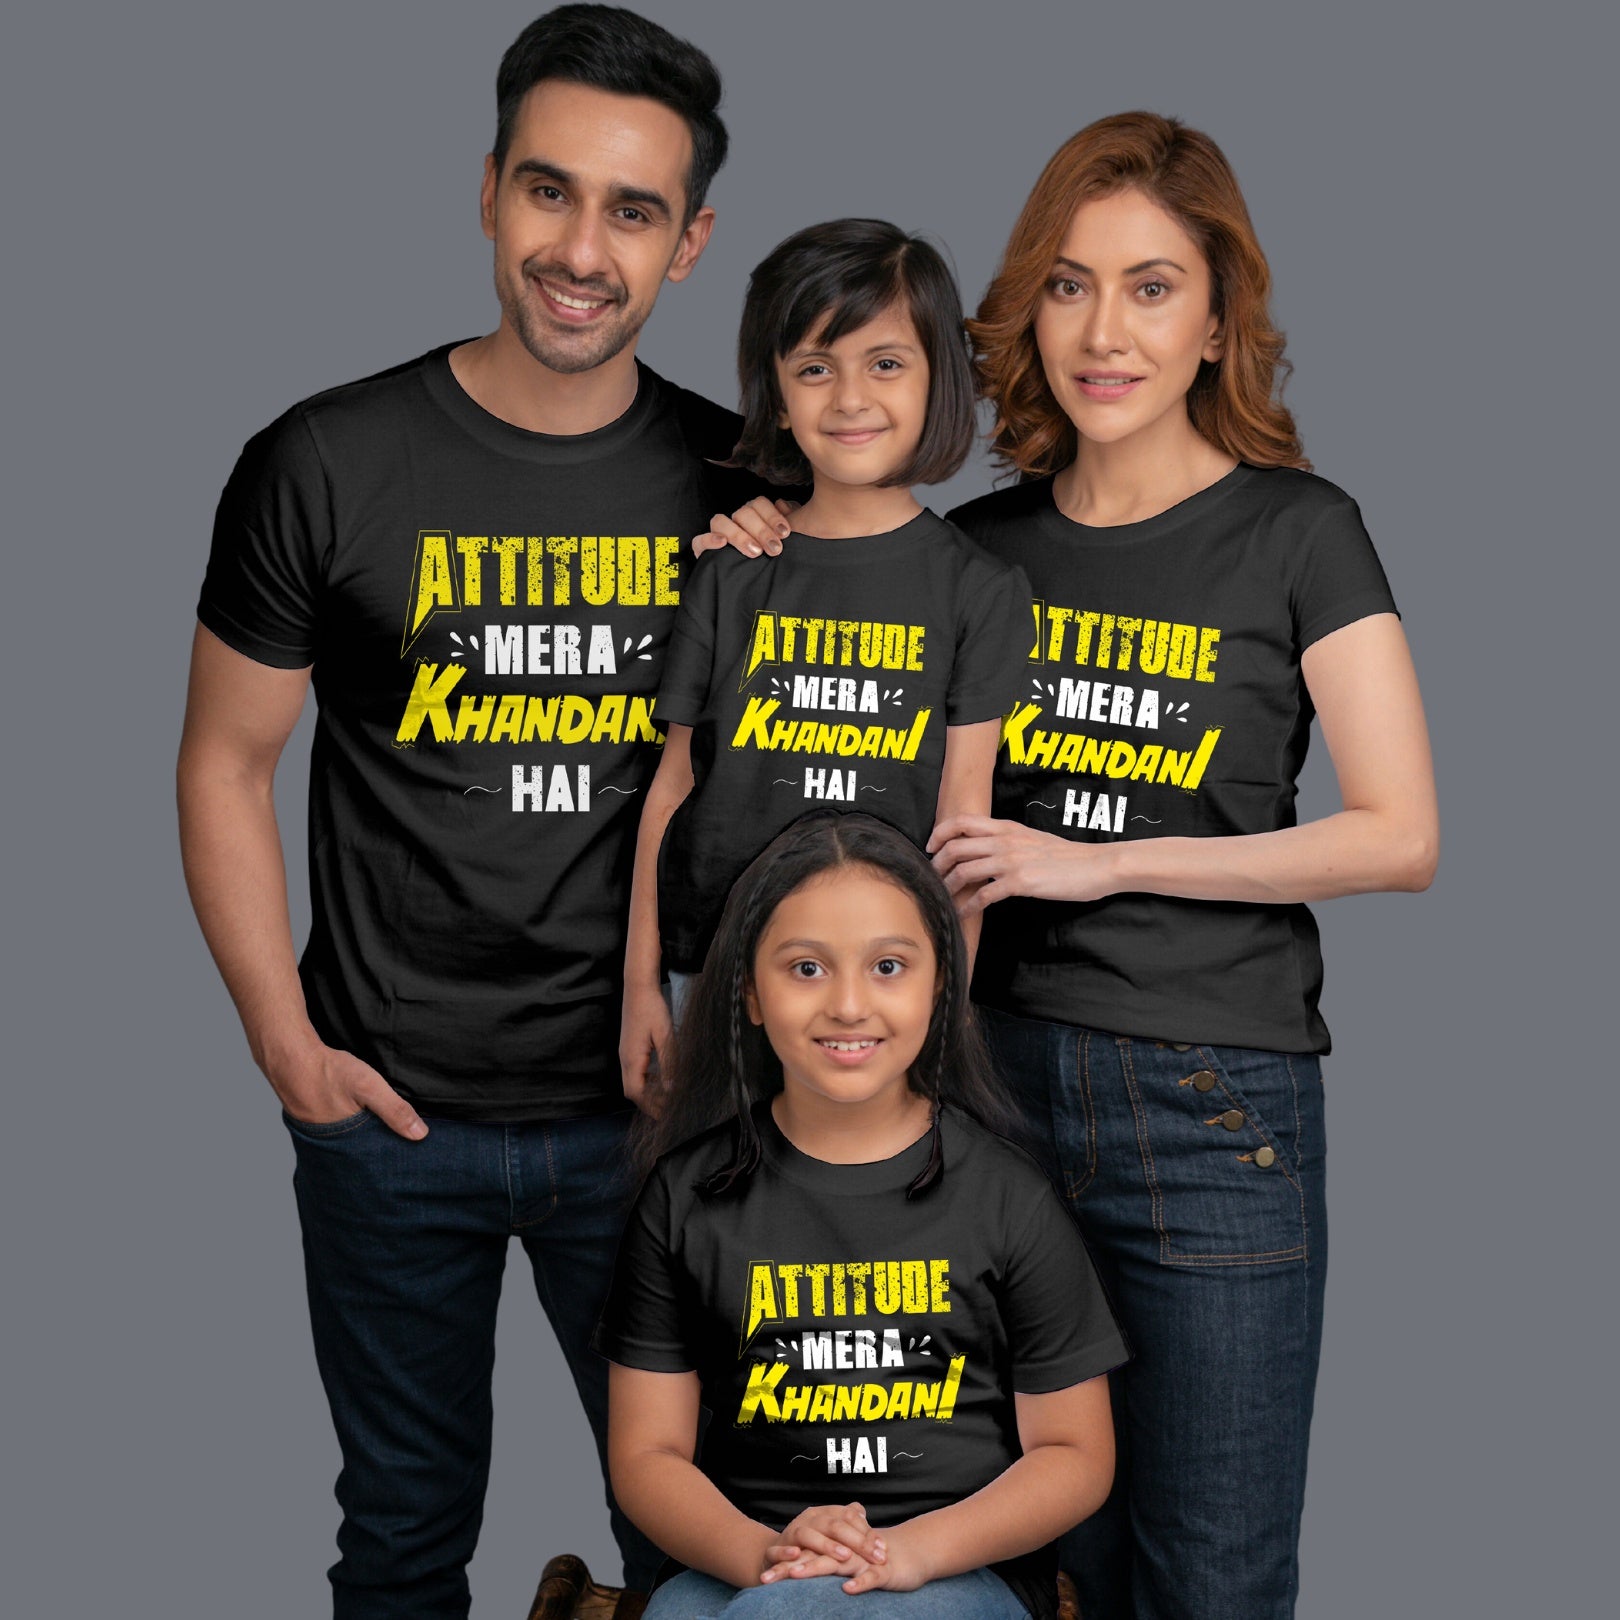 Family t shirts set of 4 Mom Dad Two Daughters in Black Colour - Attitude Mera Khandani Hain Variant